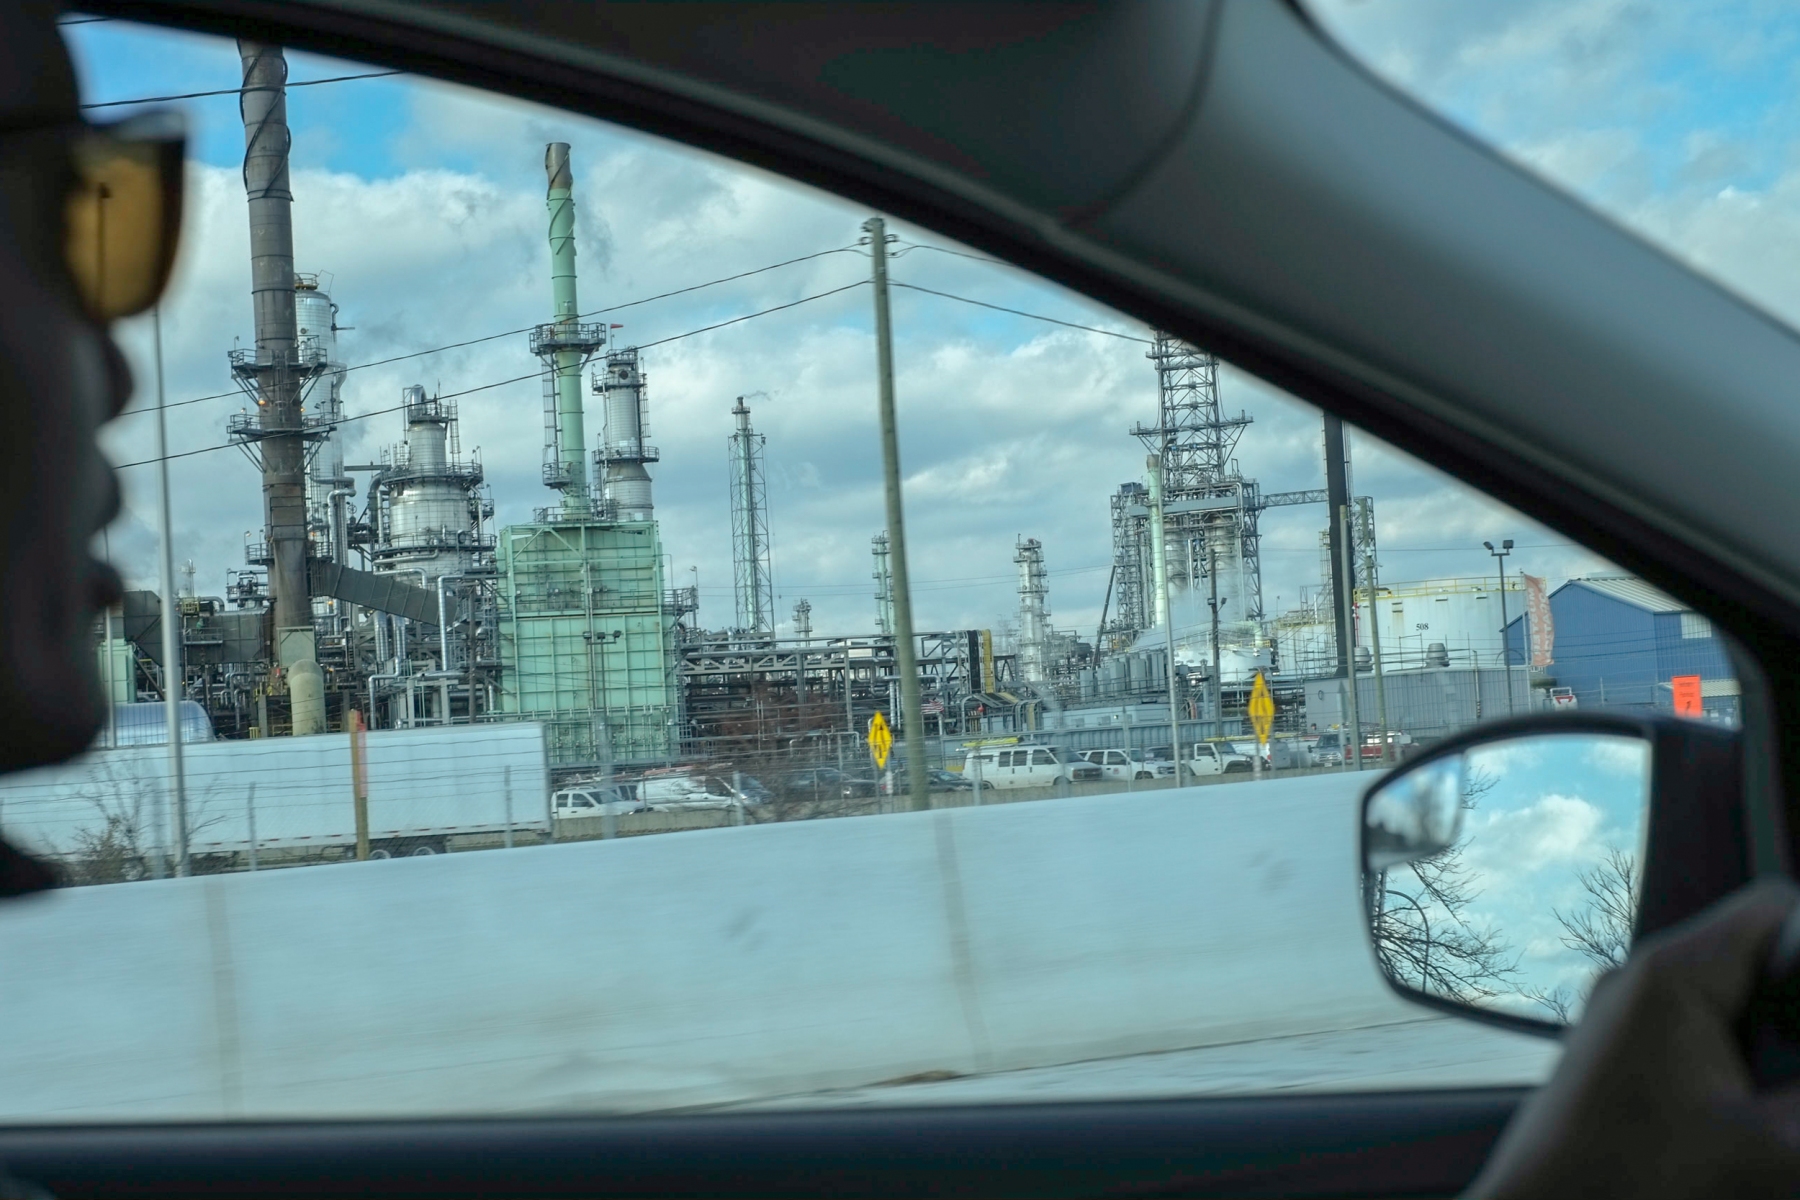 Mamba looks out his car window at the Marathon Oil Refinery in southwest Detroit. After working factory jobs when he first arrived in the US, Mamba felt that his education and successes in Burundi did not translate in America. "I hate to say it," he says "but because I did not speak English and I came from Africa, they did not trust that I was capable of the job. I learned English in 6 months. I have proven I am smart, and I can learn the job in just two or three months."